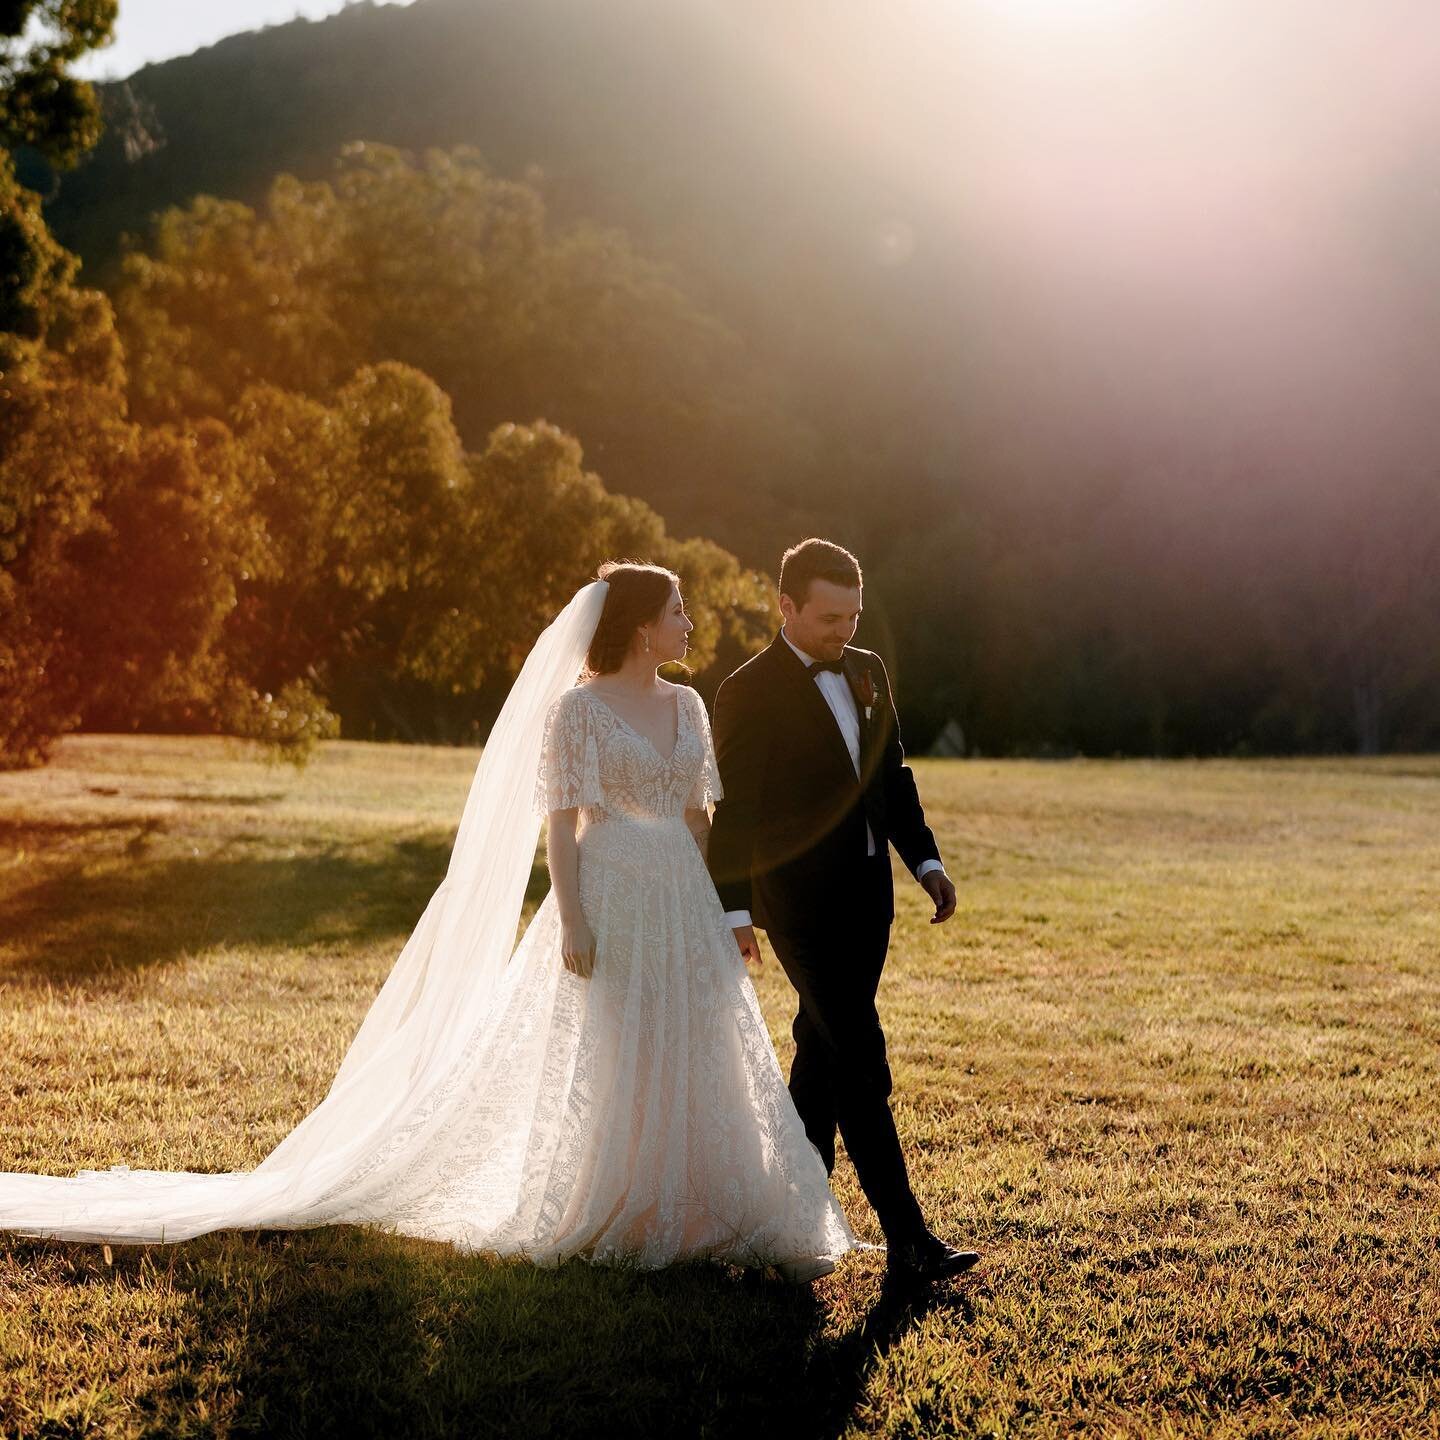 Planning a wedding? Be sure to schedule some golden hour photo time. Makes for dreamy flattering perfection.